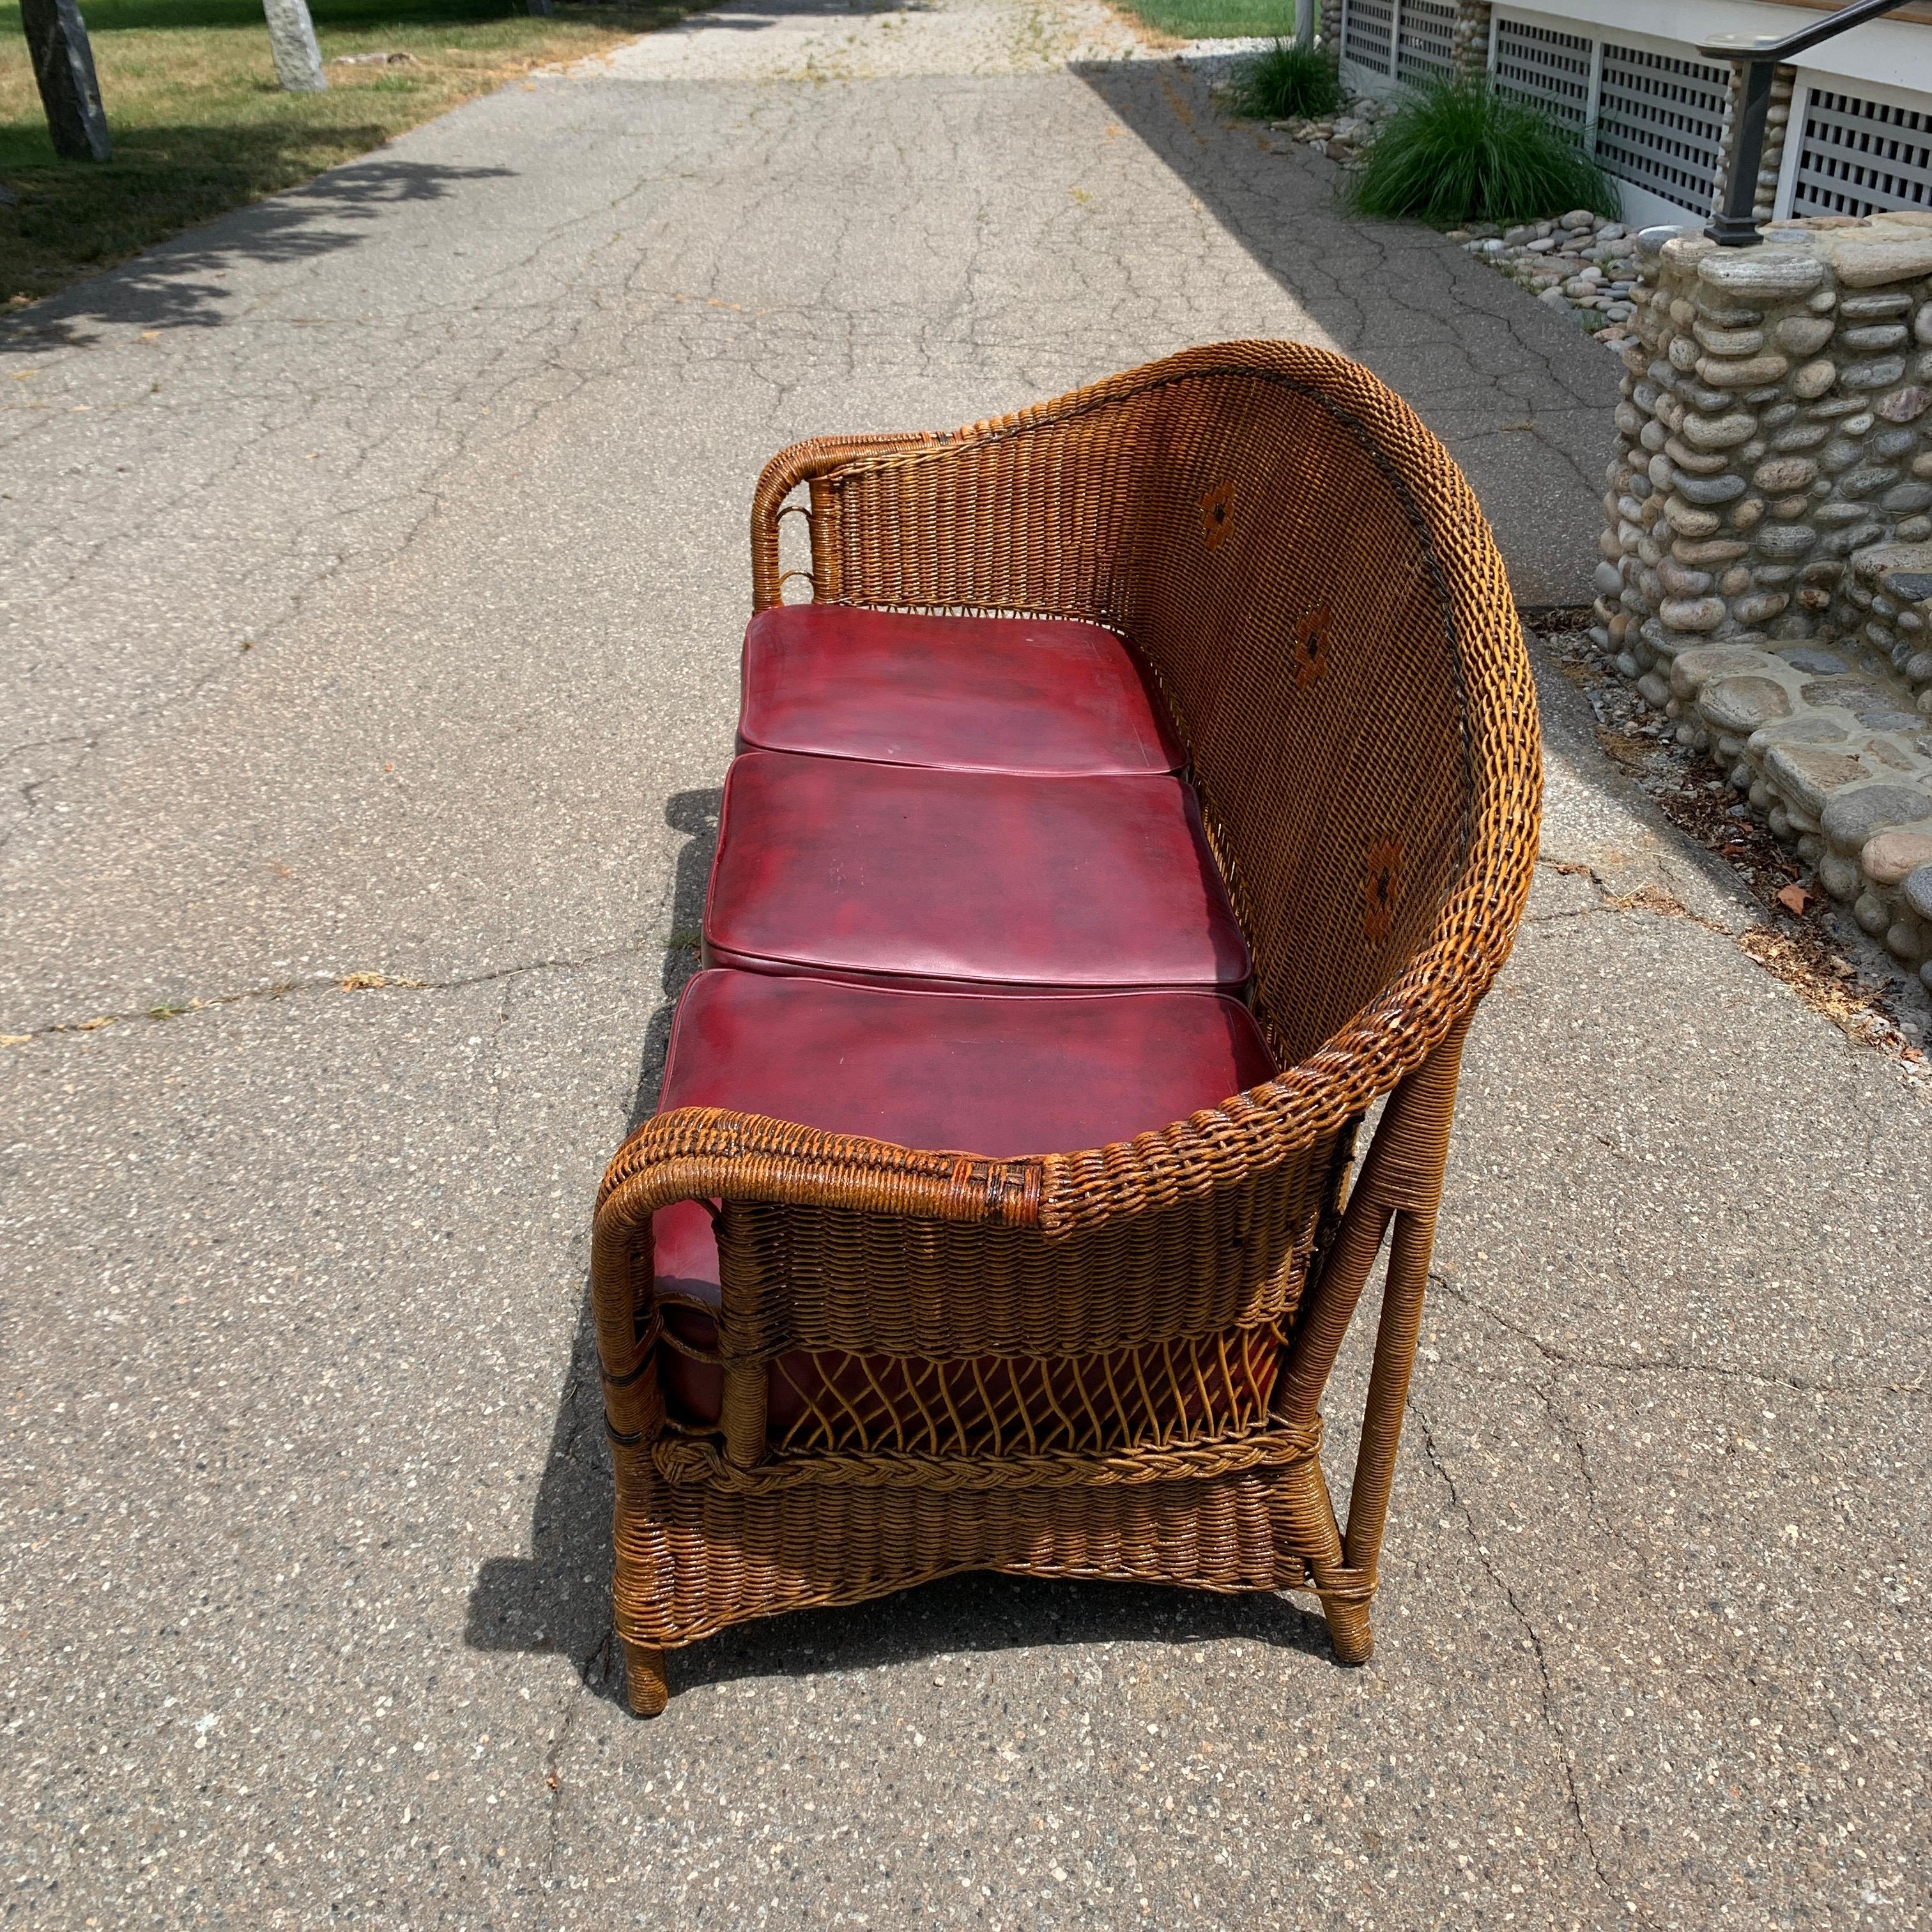 Antique wicker sofa in original stained finish. Original box springs seats covered in vinyl. Measures: 72” wide by 34” tall by 30” deep. Handwoven by The Brighton Furniture Company of Vermont in the early 1900s.